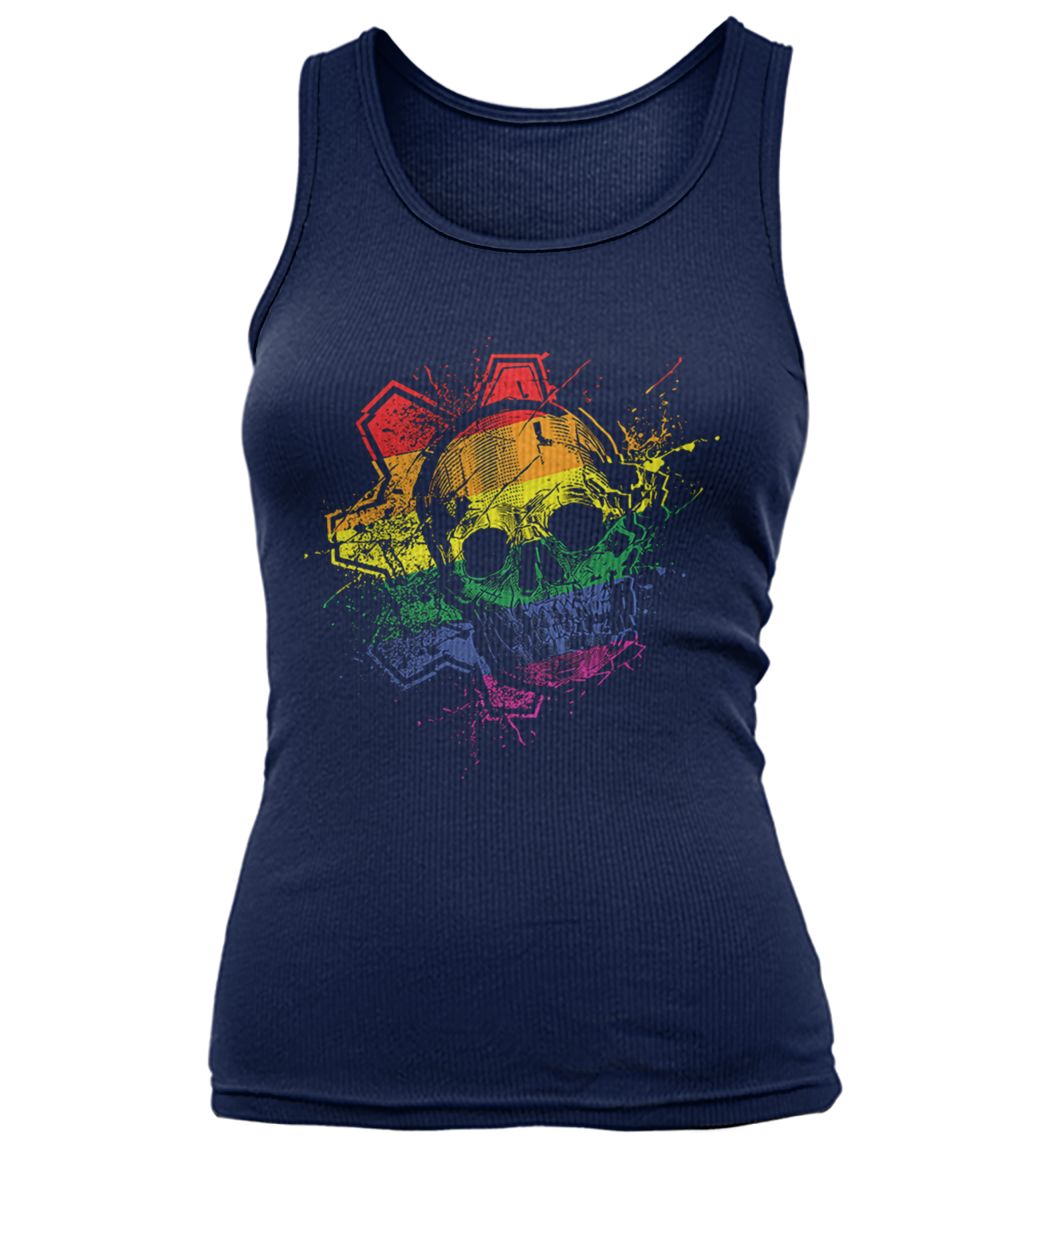 Skull with lgbt flag women's tank top